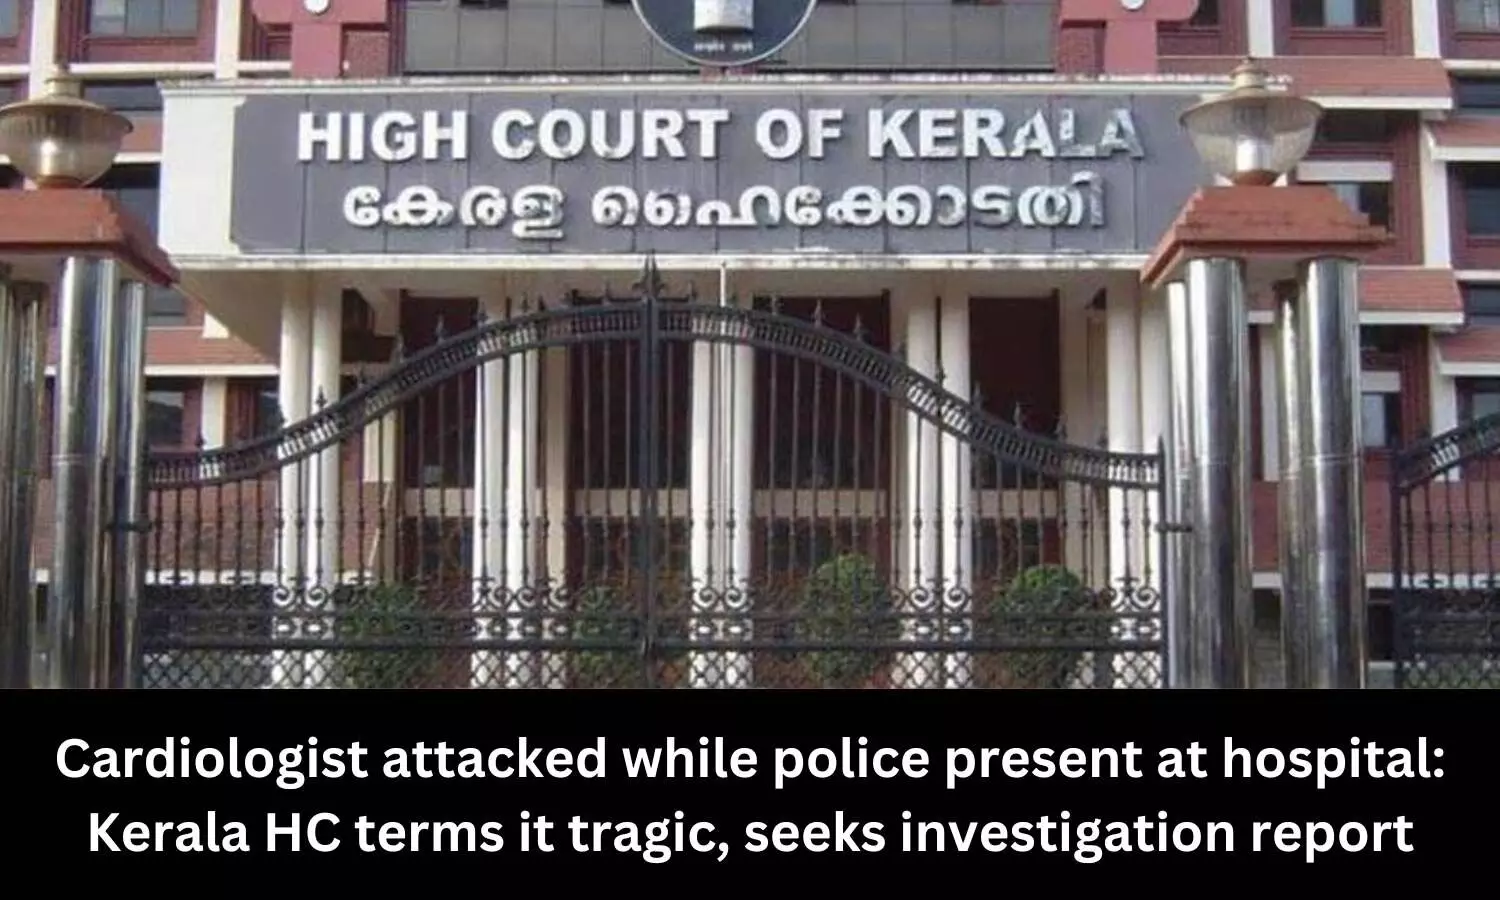 Cardiologist attacked while police present at hospital: Kerala HC terms it tragic